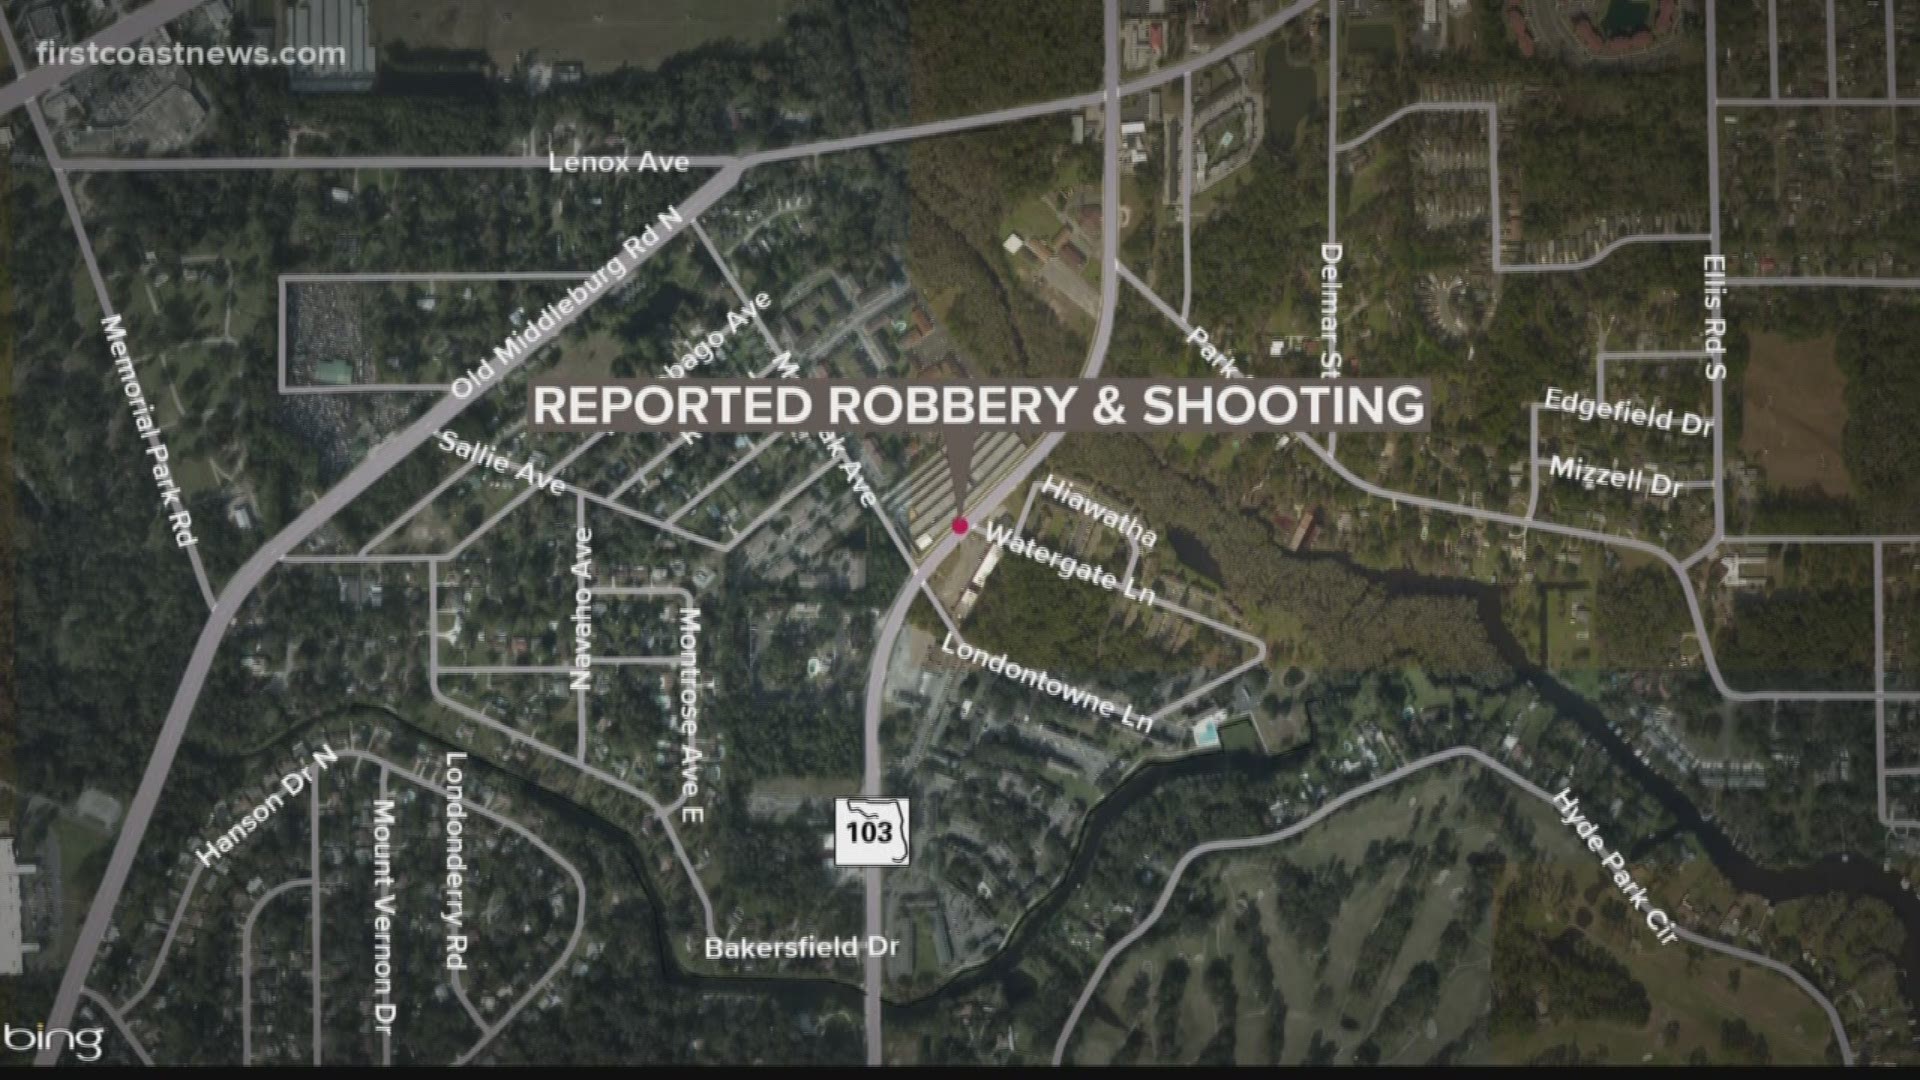 The Jacksonville Sheriff's Office said it responded to a call about a robbery with a shooting in the 1500 block of Lane Avenue South.